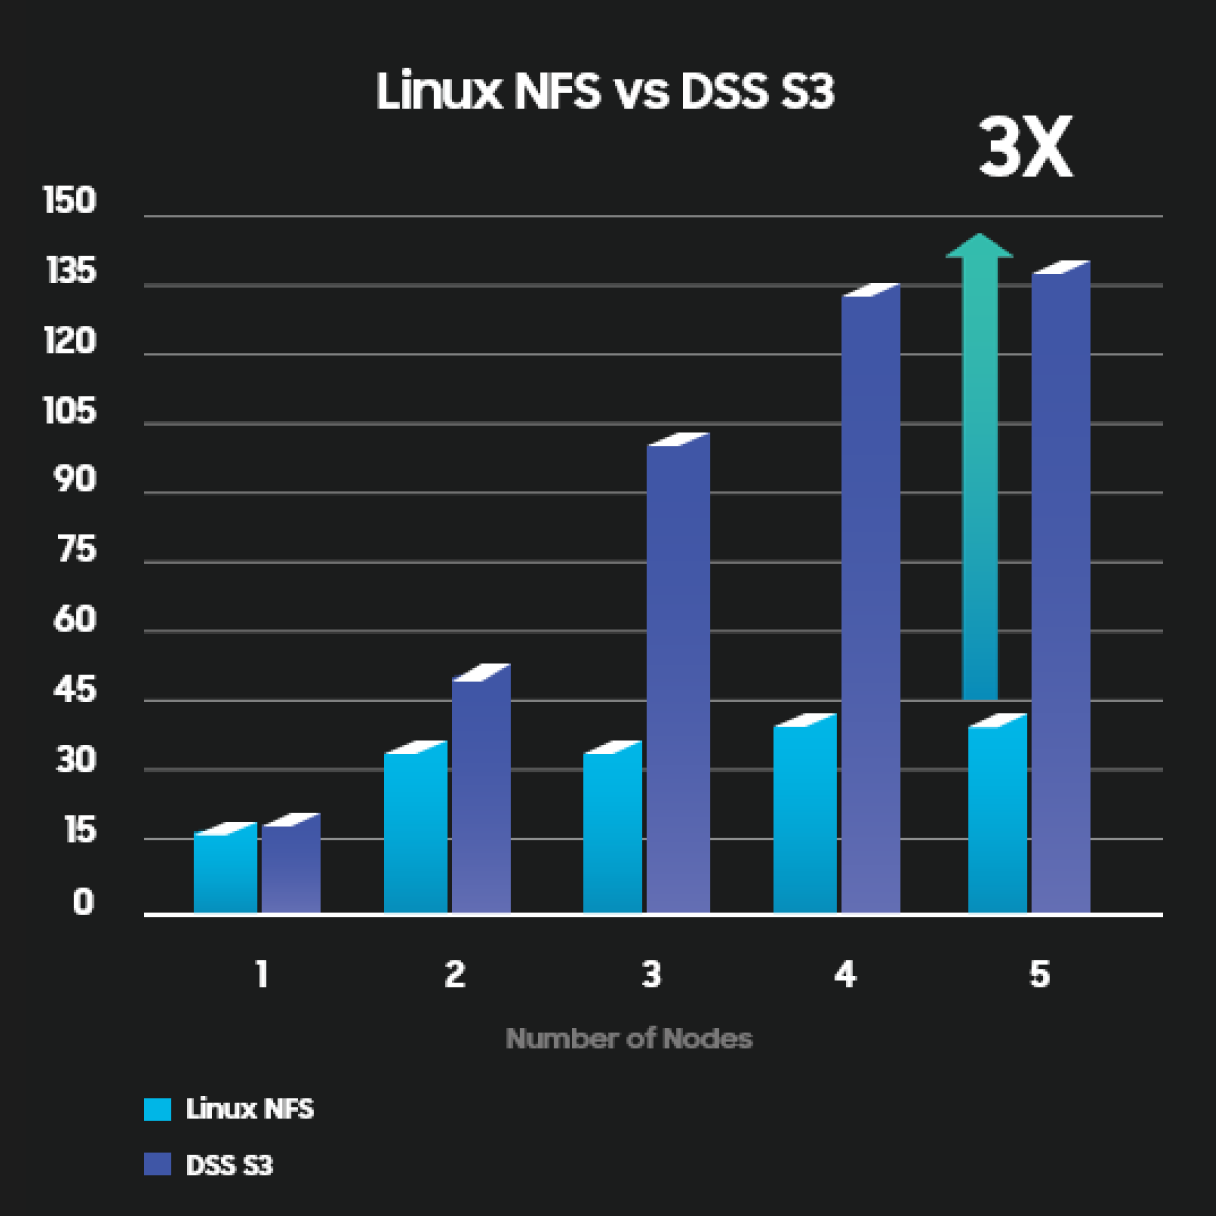 A bar graph comparing the performance of Linux NFS with DSS S3 across a varying number of nodes, indicating a threefold increase in performance